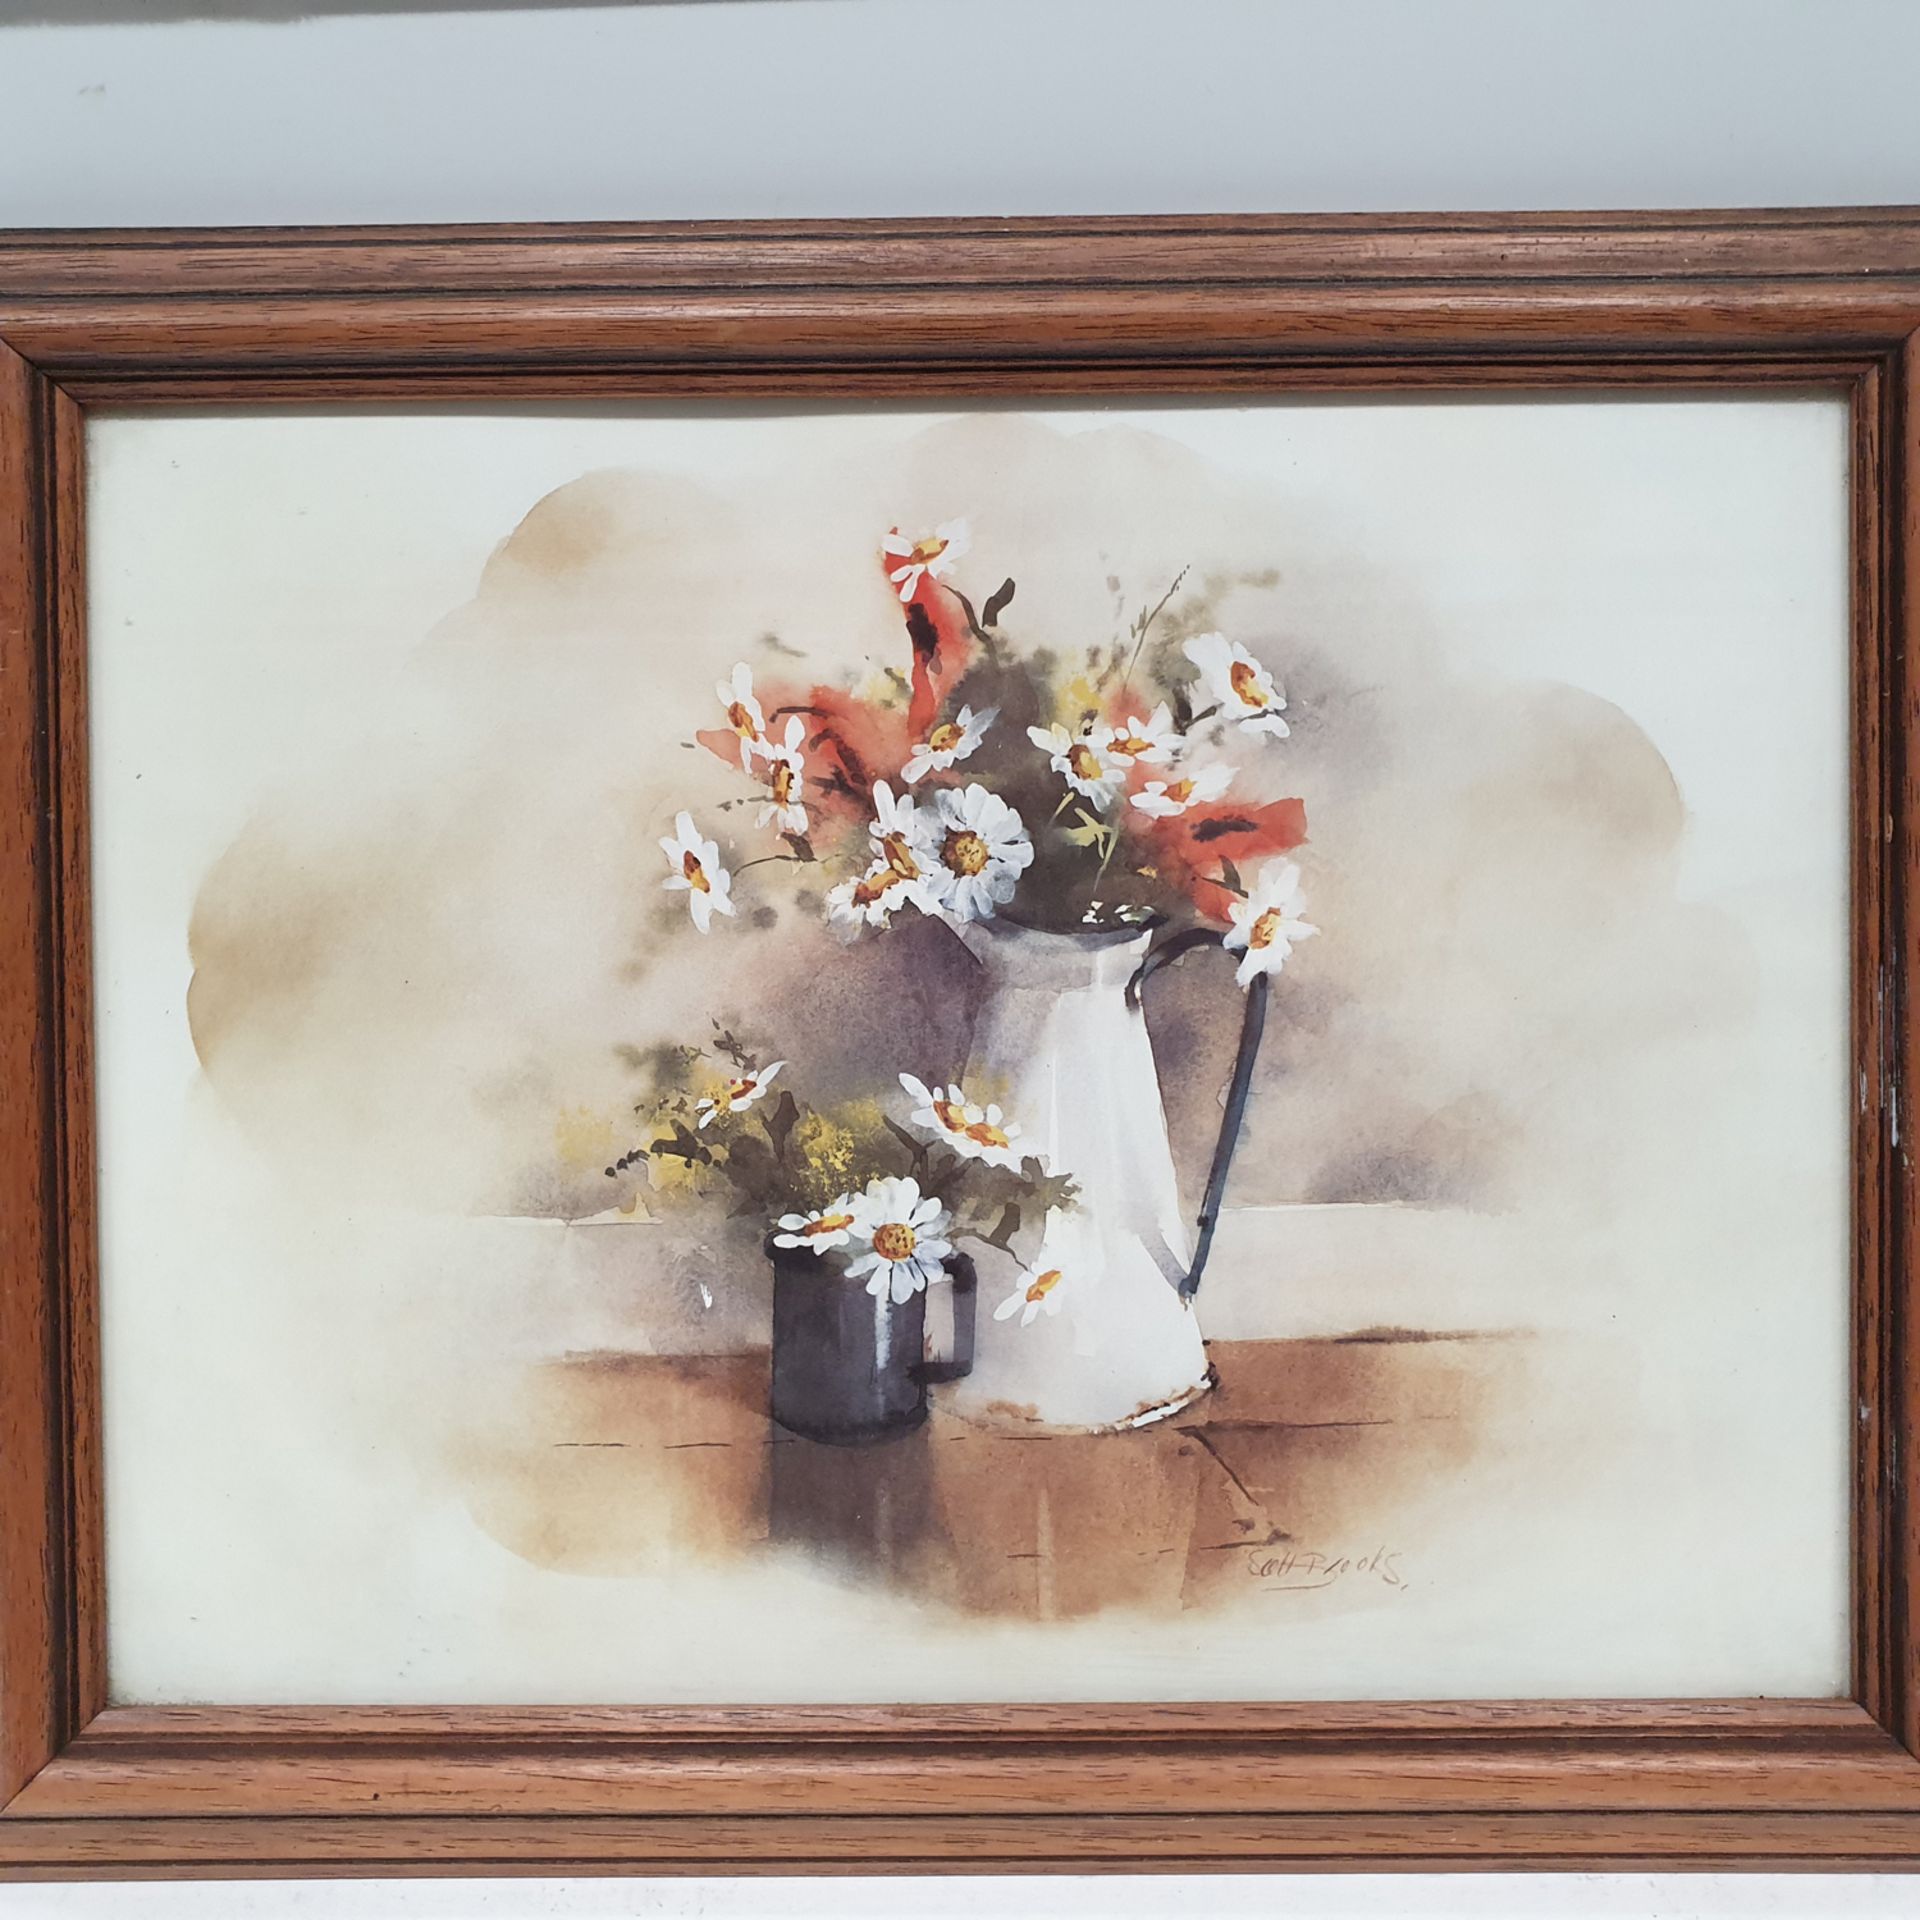 Jug of Poppies and Daisy's Framed Picture. Signed Scott Brooks. - Image 2 of 4